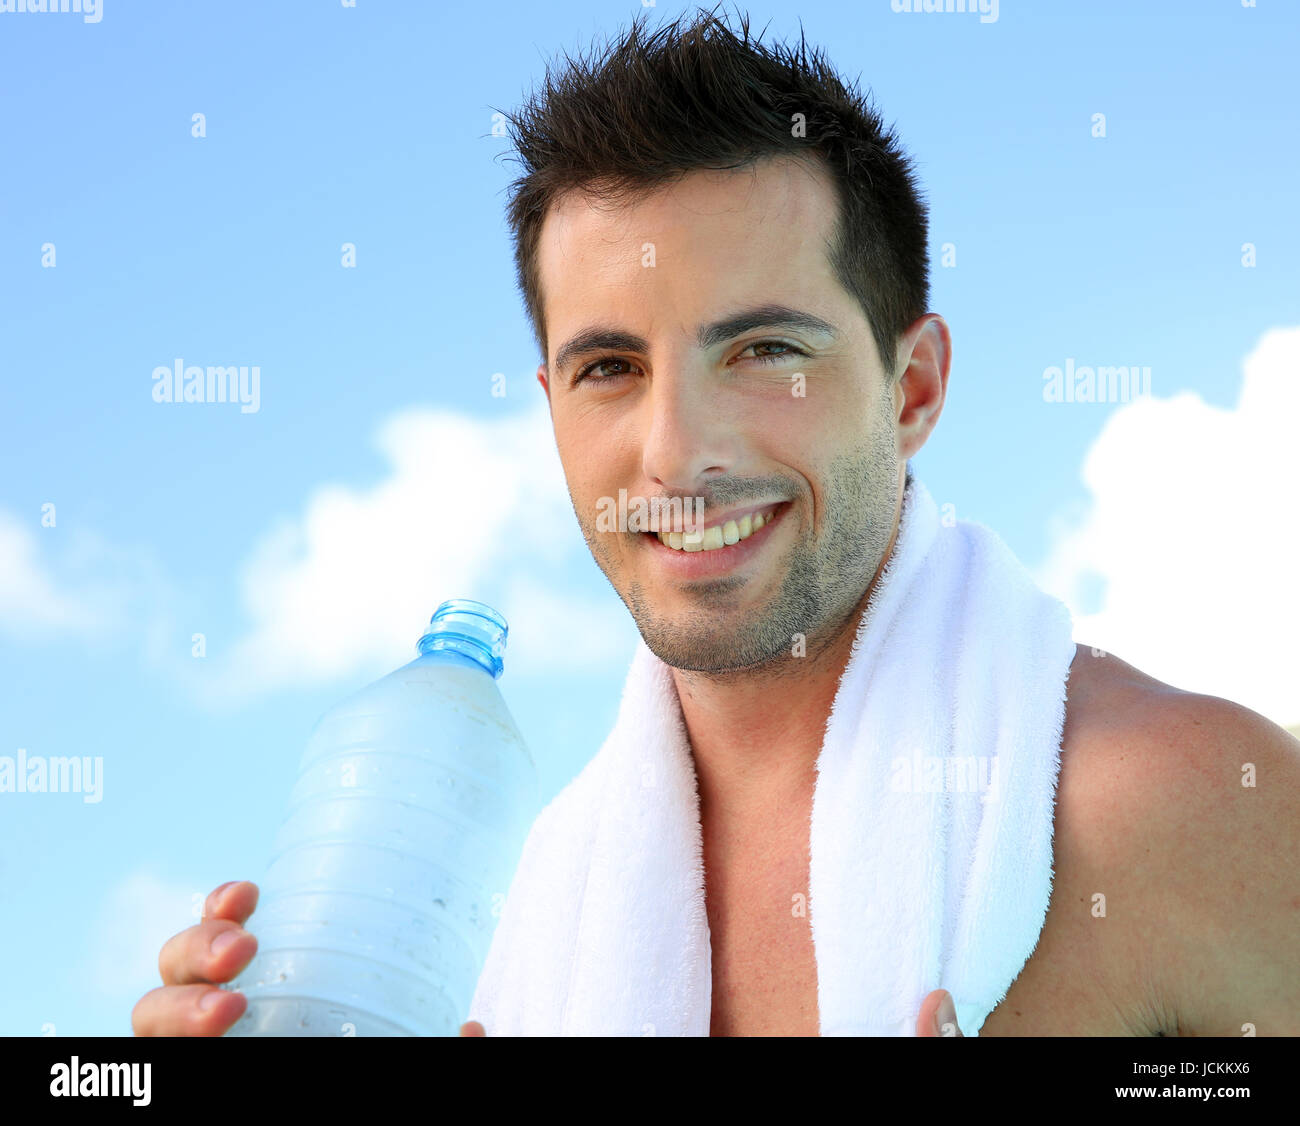 Handsome man drinking water after exercising Stock Photo